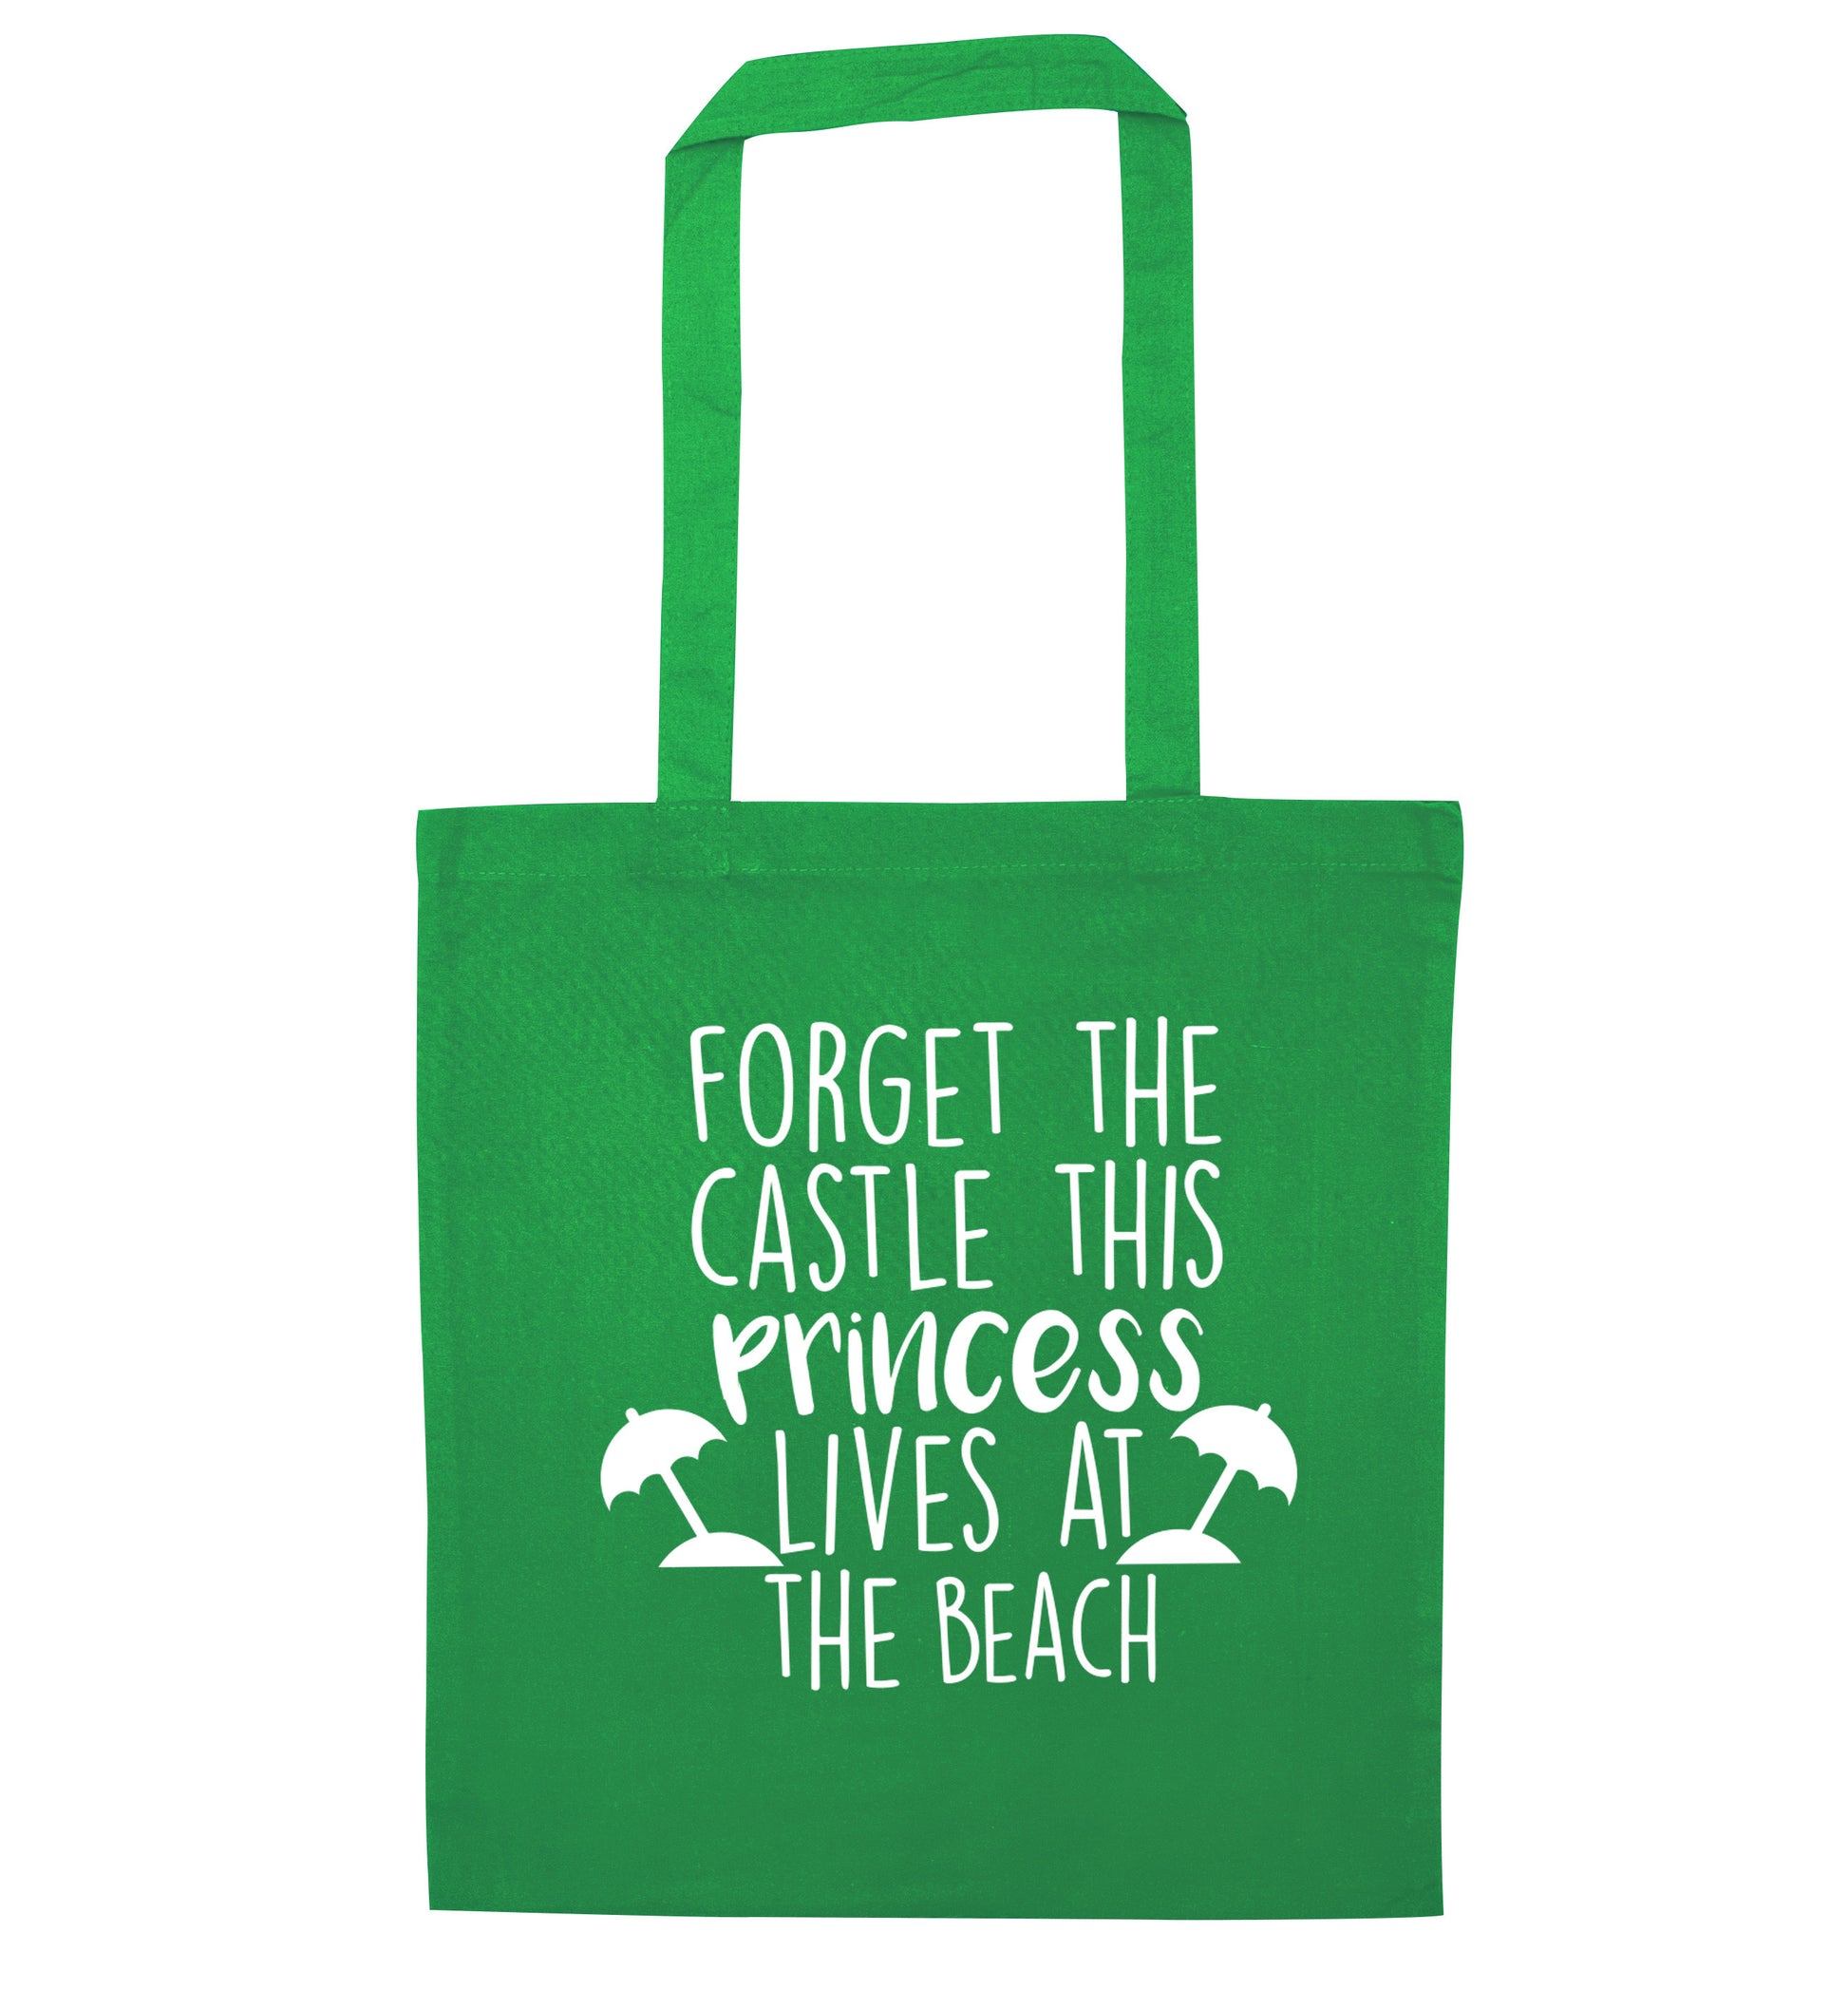 Forget the castle this princess lives at the beach green tote bag